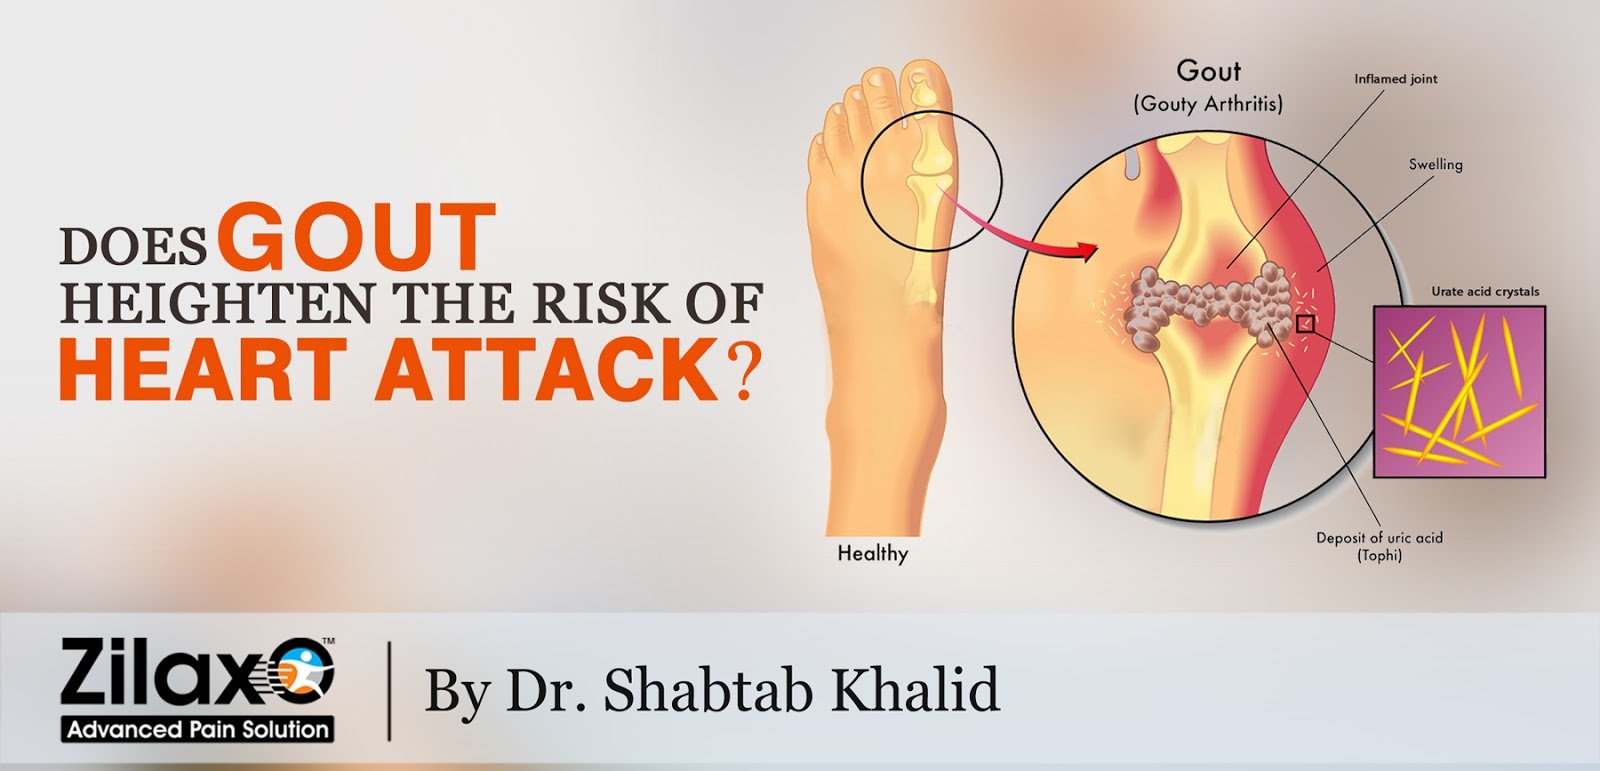 Zilaxo Advanced Pain Solution: Does Gout Heighten The Risk Of Heart Attack?